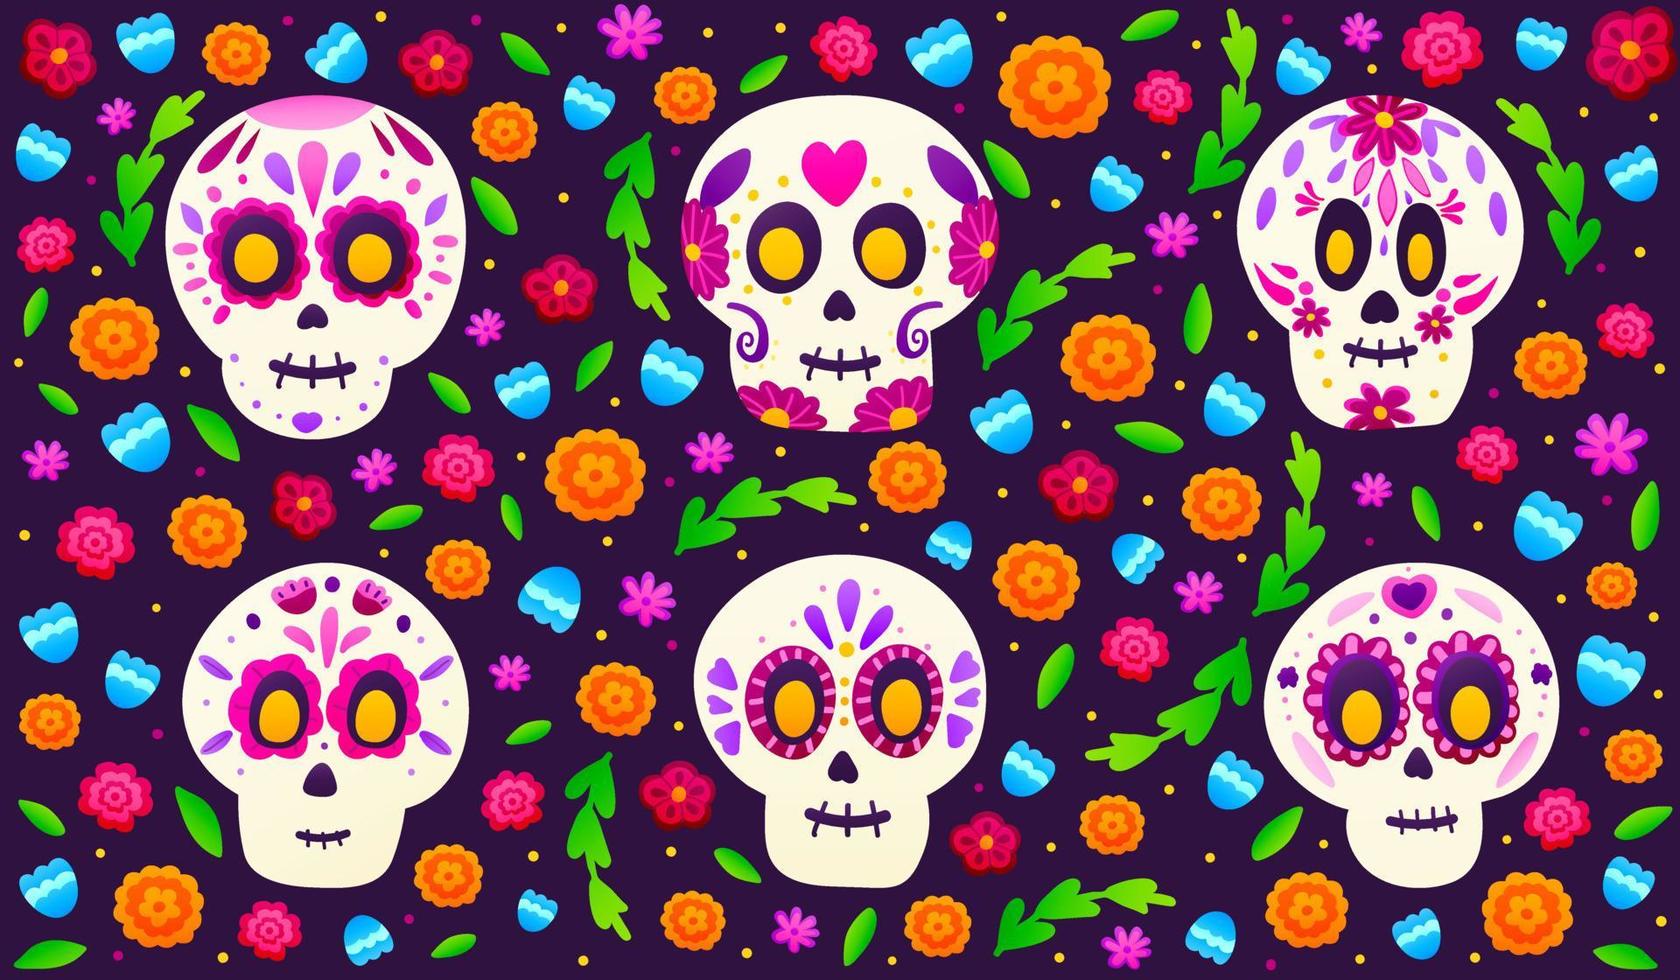 Sugar skulls with colourful flowers on dark background, banner for mexical holiday dia de los muertos in cartoon style, floral ornate with marigolds vector